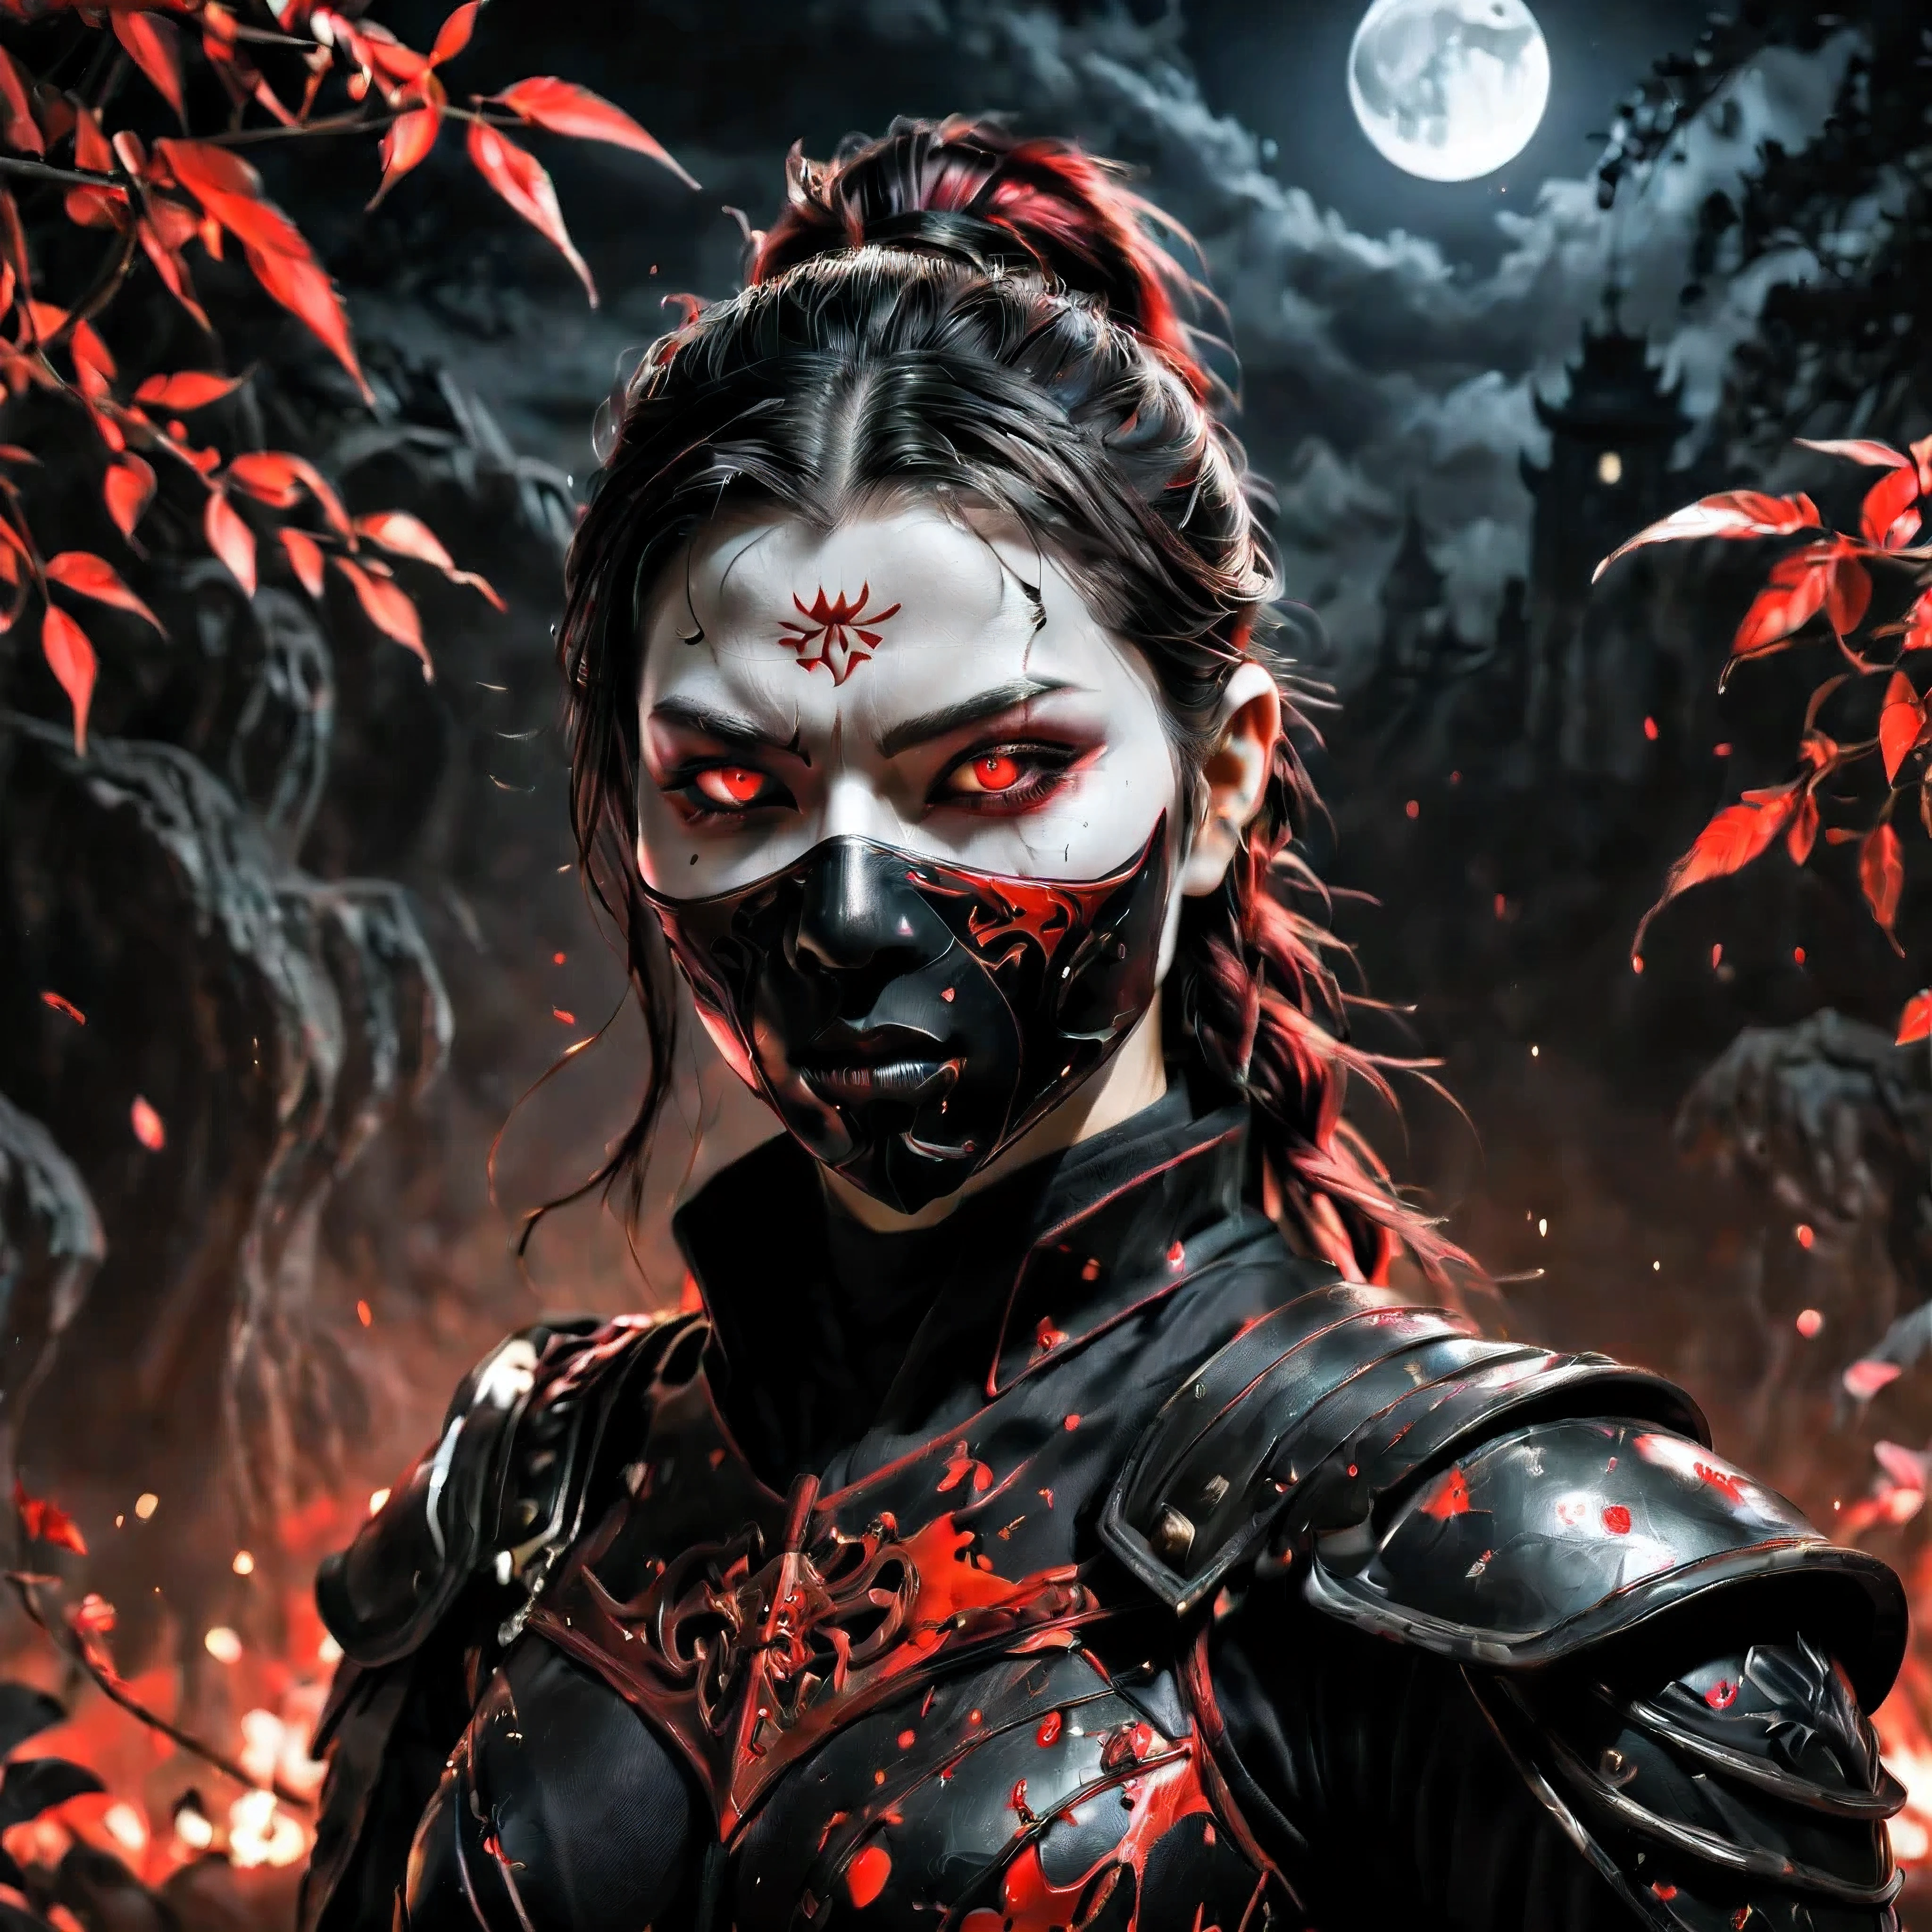 best quality,ultra-detailed,realistic:1.37,unique interpretation,portrait,horror,ninja cloth,ninja mask,female vampire,red eye,full body,detailed facial features,elegant stance,nighttime scene,moonlight illumination,sinister atmosphere,dark colors,splatter of blood,selective color vibrance,vivid red accents,lifelike textures,detailed folds and creases in the cloth,sharp focus,contrasting shadows,high contrast lighting